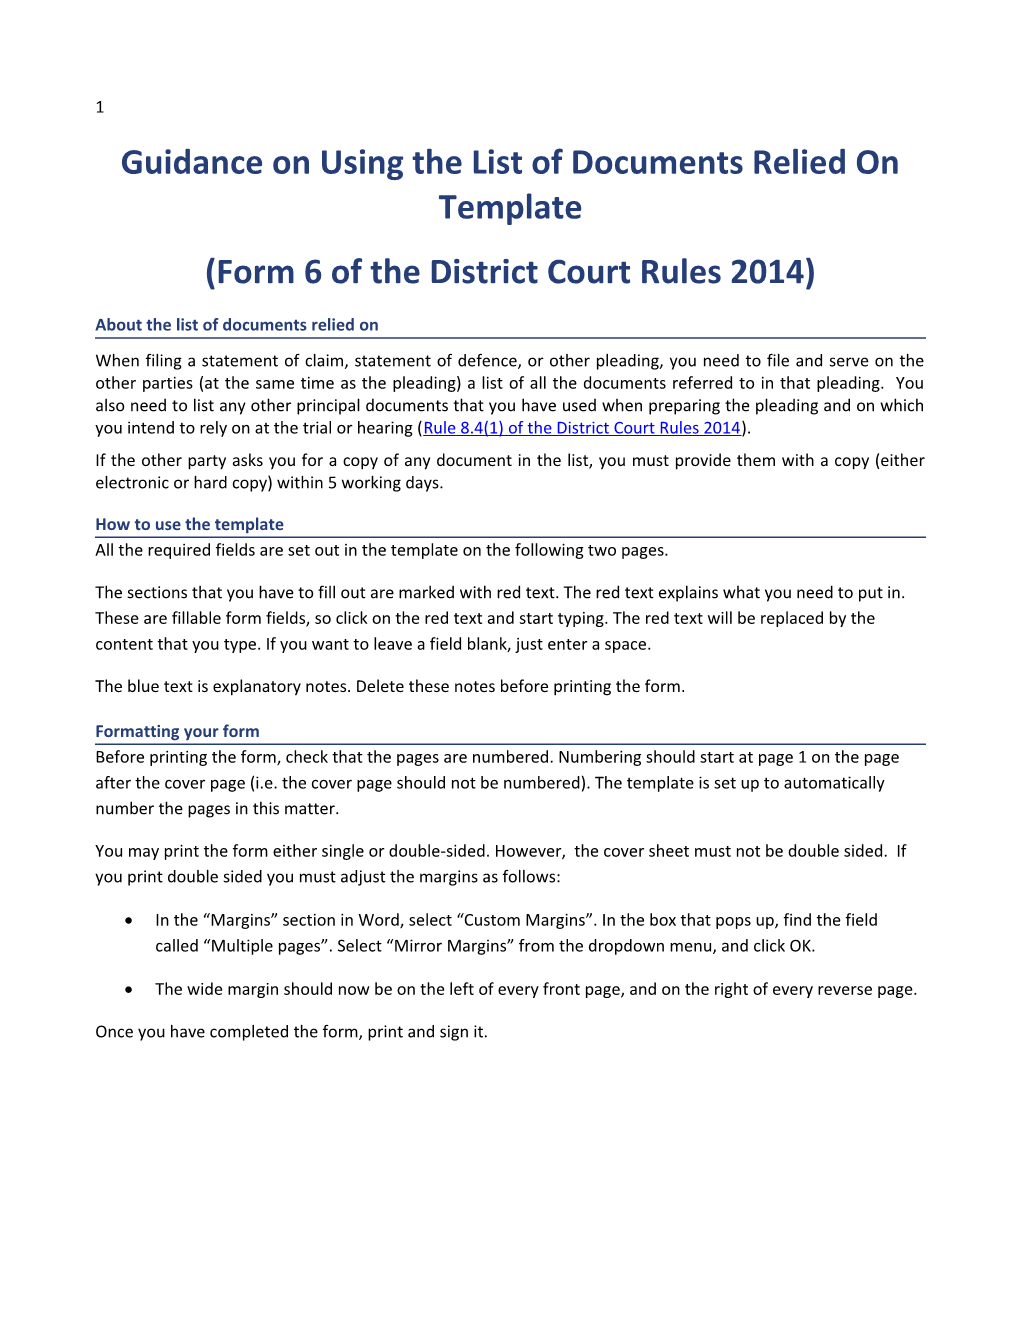 Guidance on Using the List of Documents Relied on Template